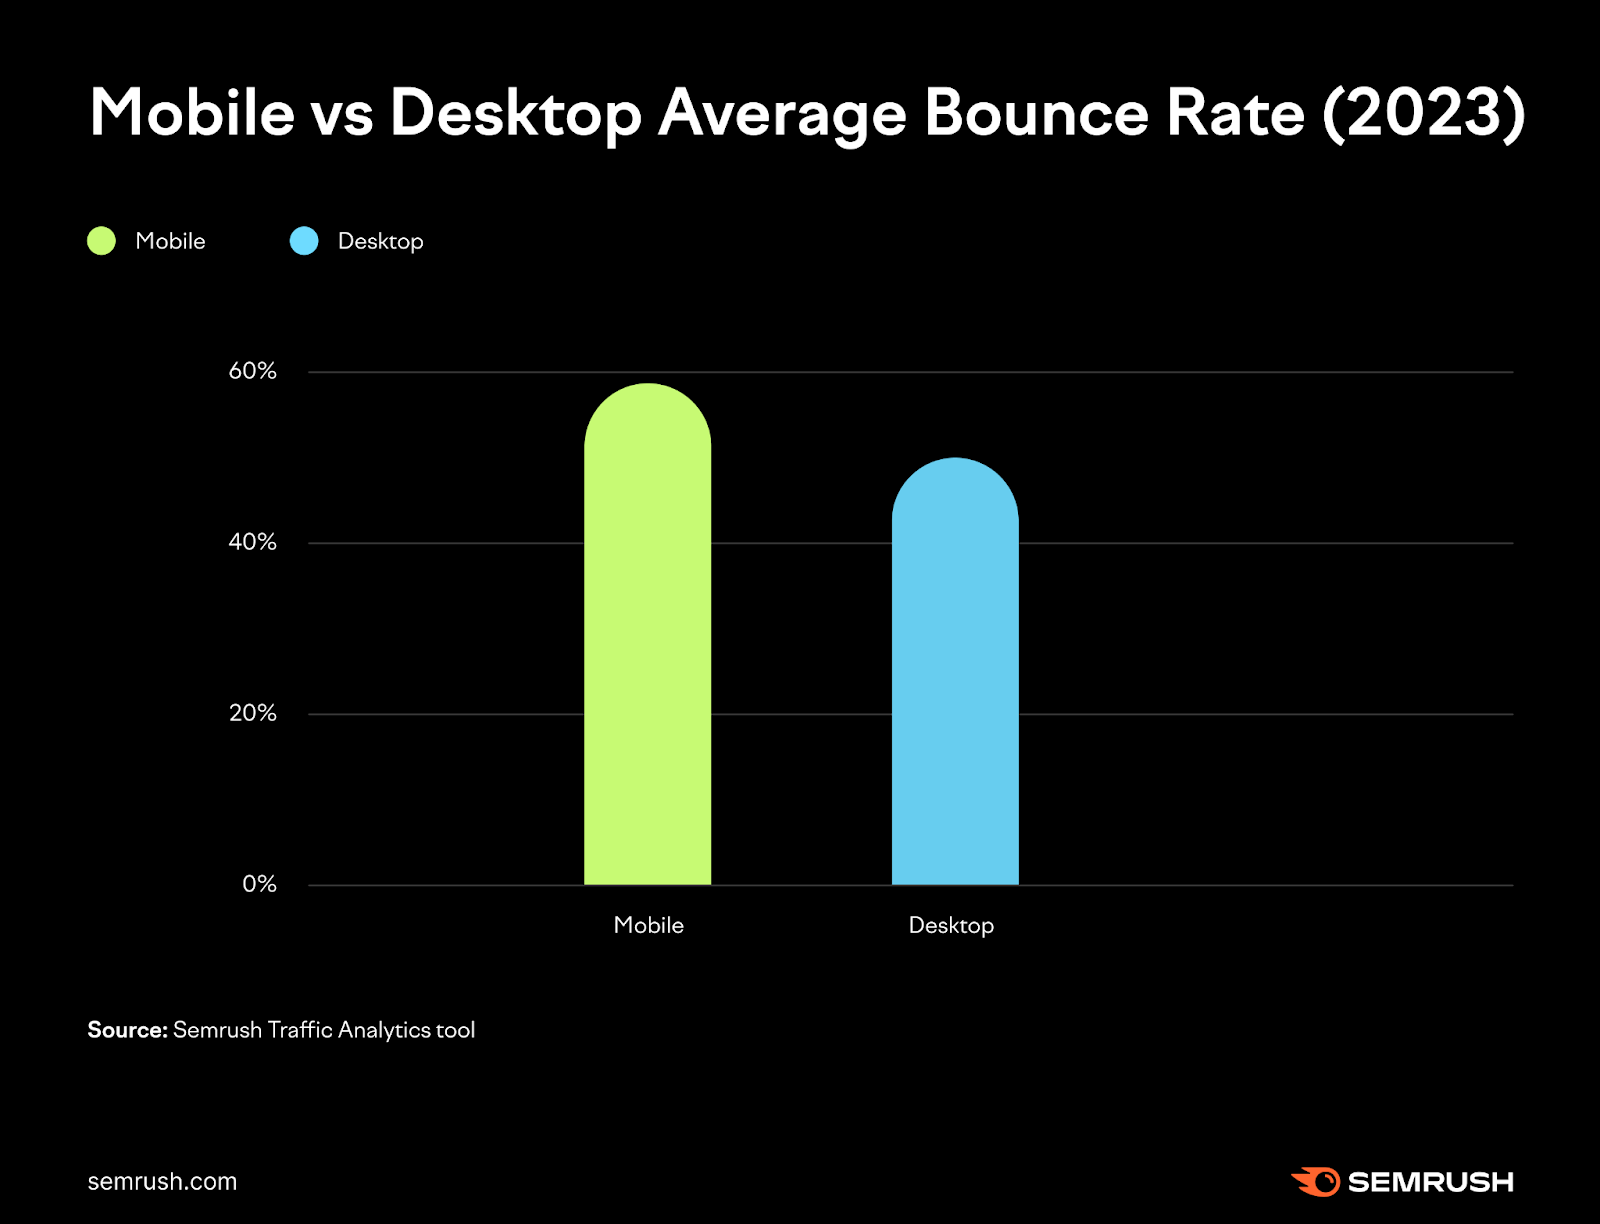 A chart showing mobile vs desktop average bounce rate in 2023, using data from Traffic Analytics tool